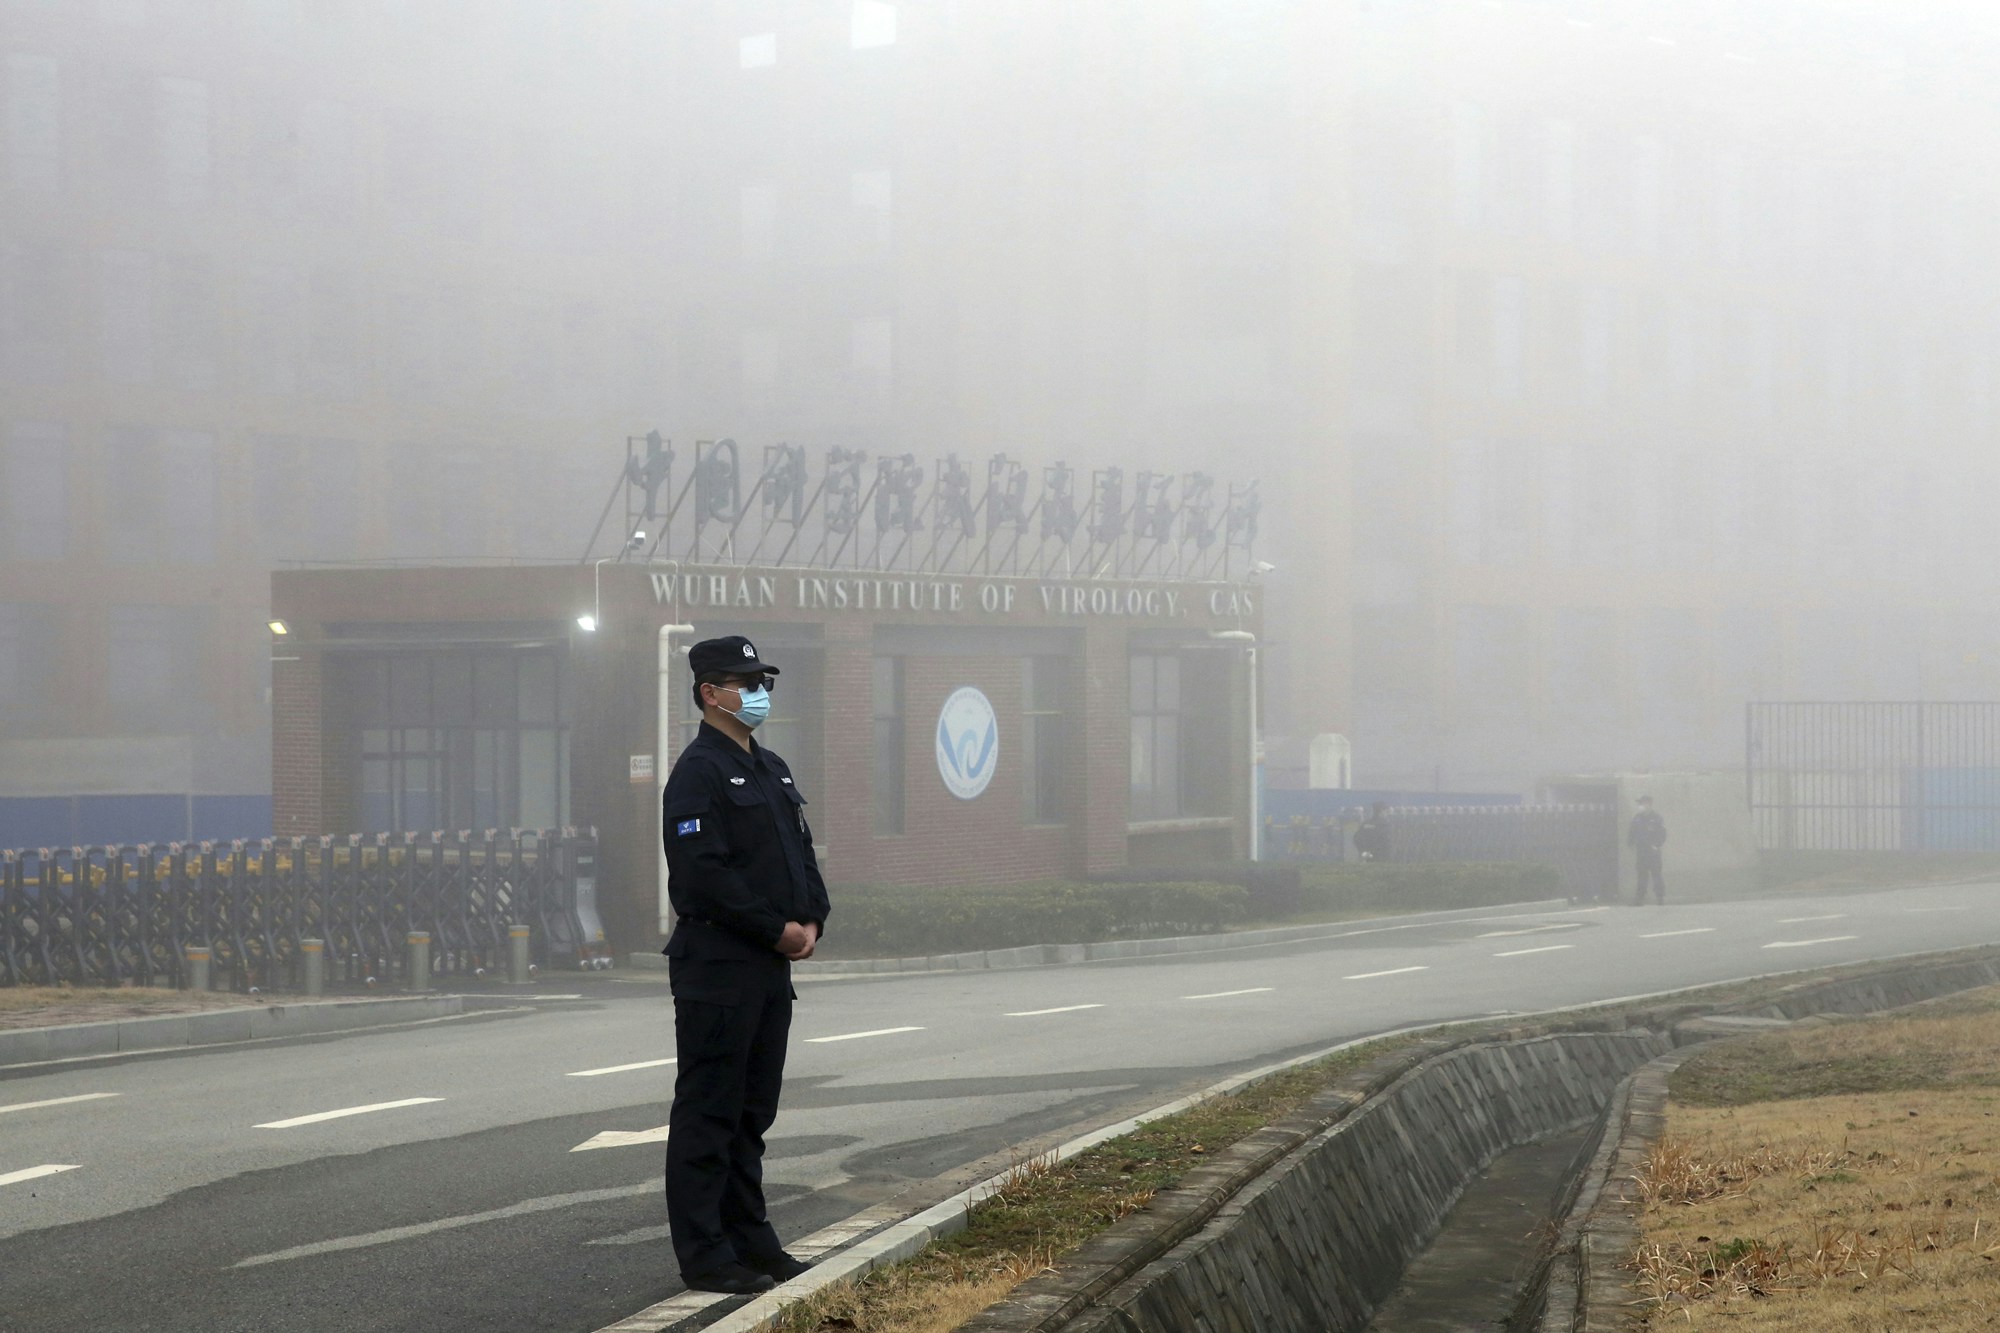 A man guards in front of Wuhan Institute of Virology in Wuhan City, Hubei Province, China on February 3, 2021. Members of World Health Organization (WHO) visited this facility on the same day. WHO probe team has been tackling to investigate into the origins of the new coronavirus COVID-19 pandemic. ( The Yomiuri Shimbun via AP Images )